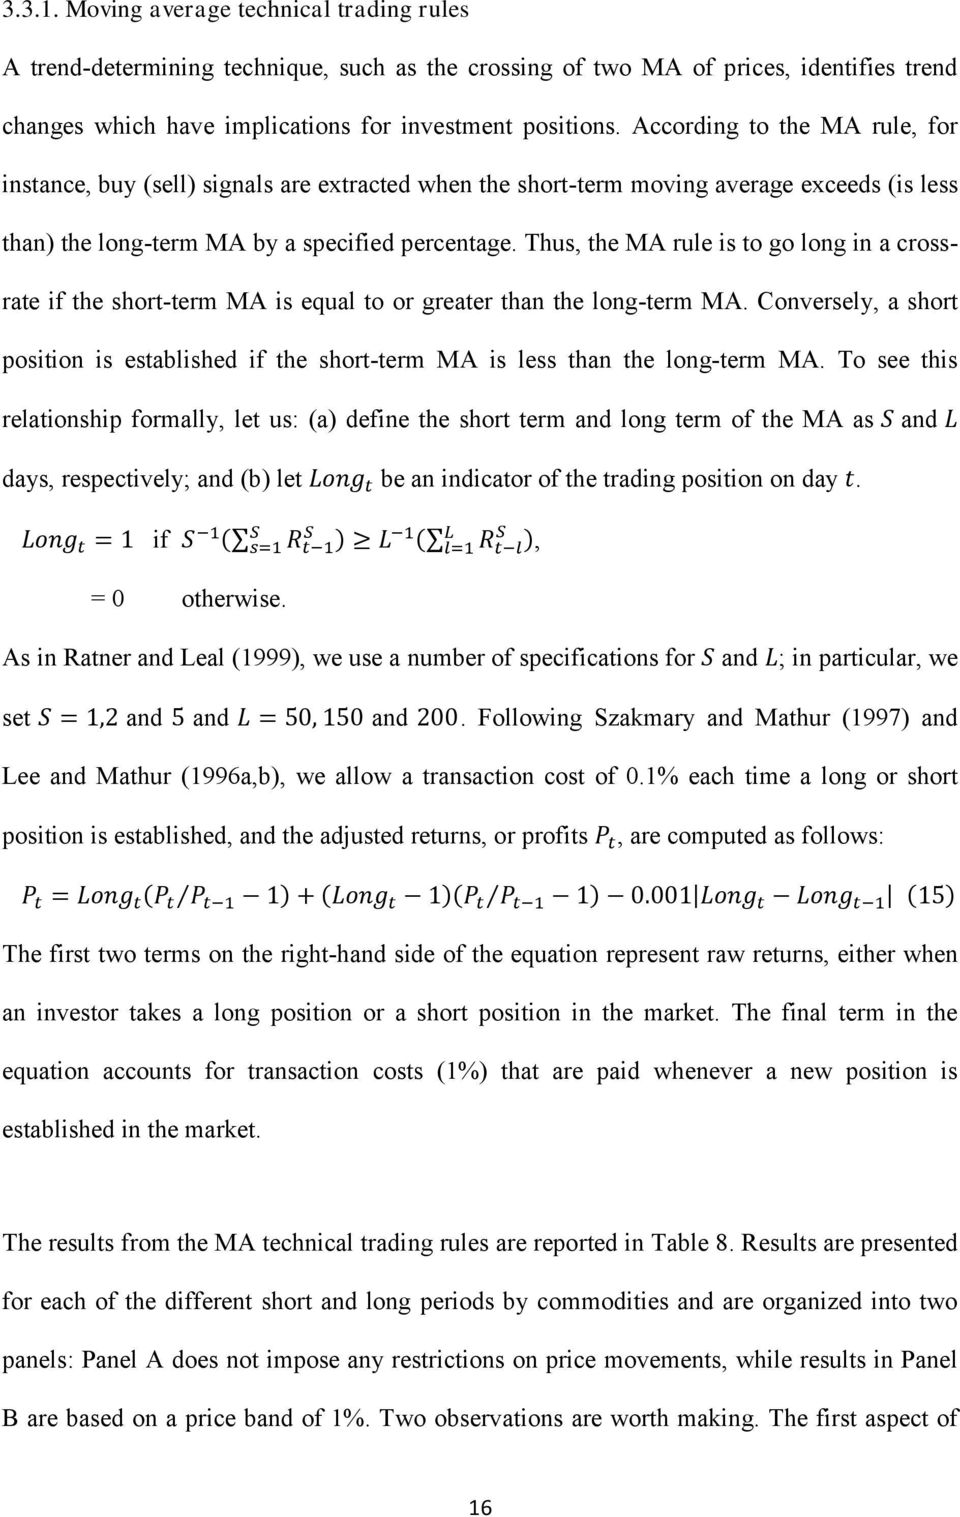 Thus, the MA rule is to go long in a crossrate if the short-term MA is equal to or greater than the long-term MA.